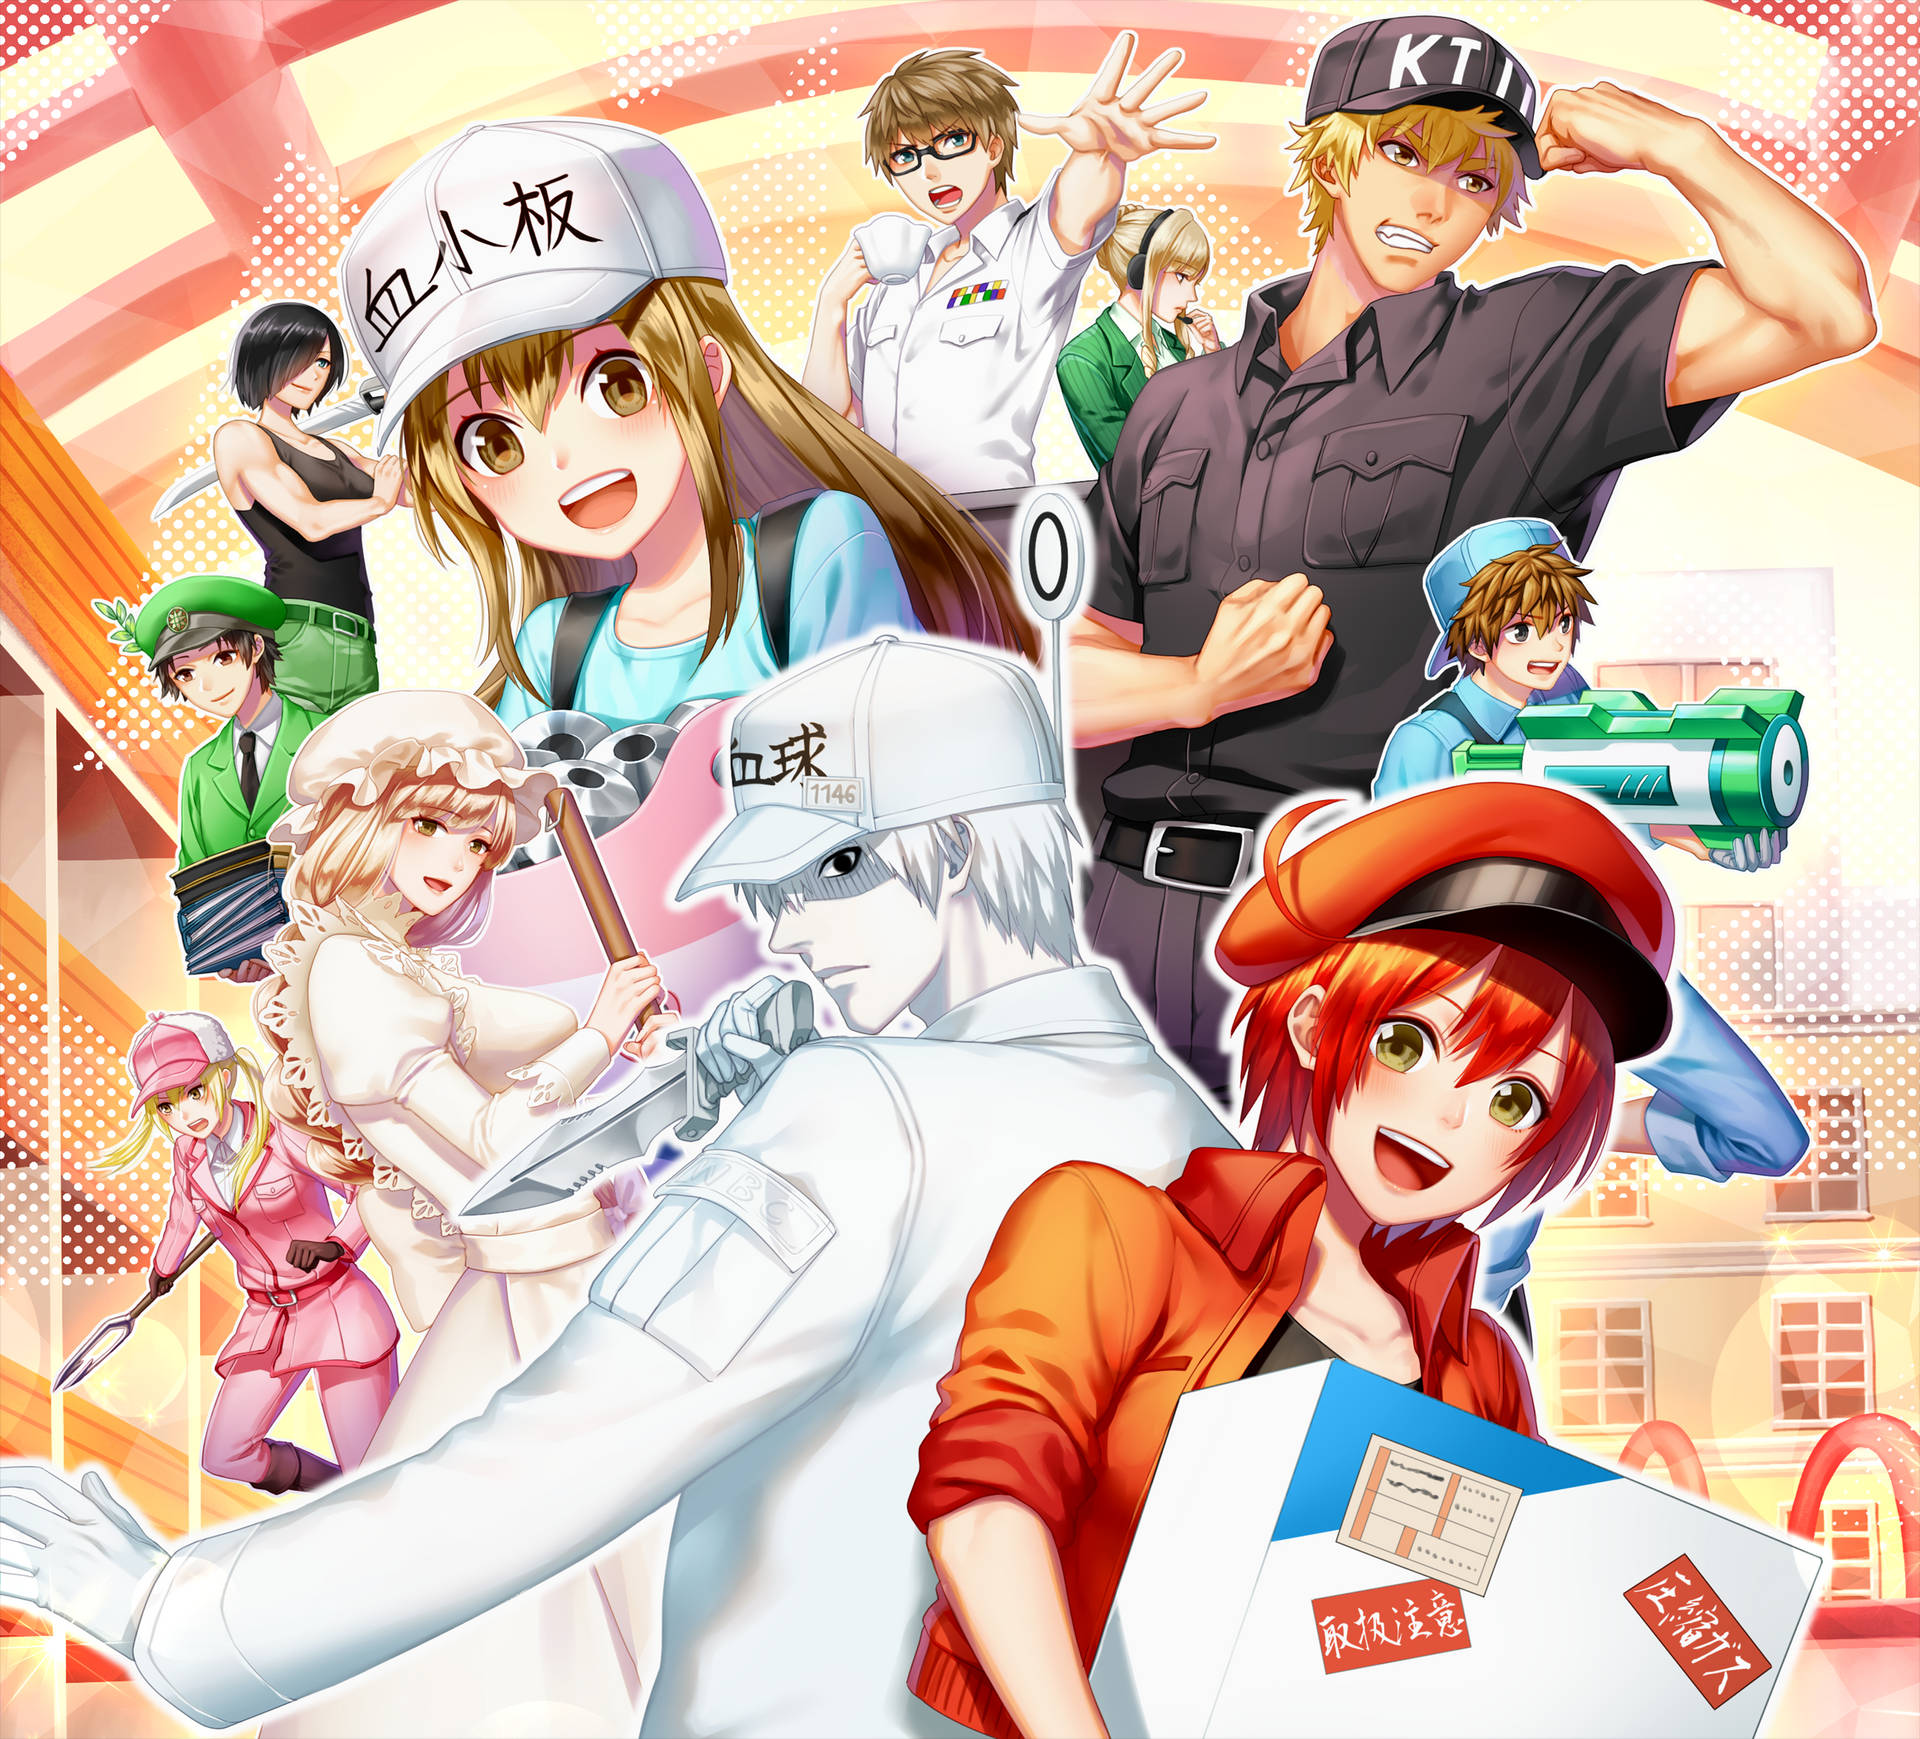 Free Cells At Work Wallpaper Downloads, [100+] Cells At Work Wallpapers for  FREE 